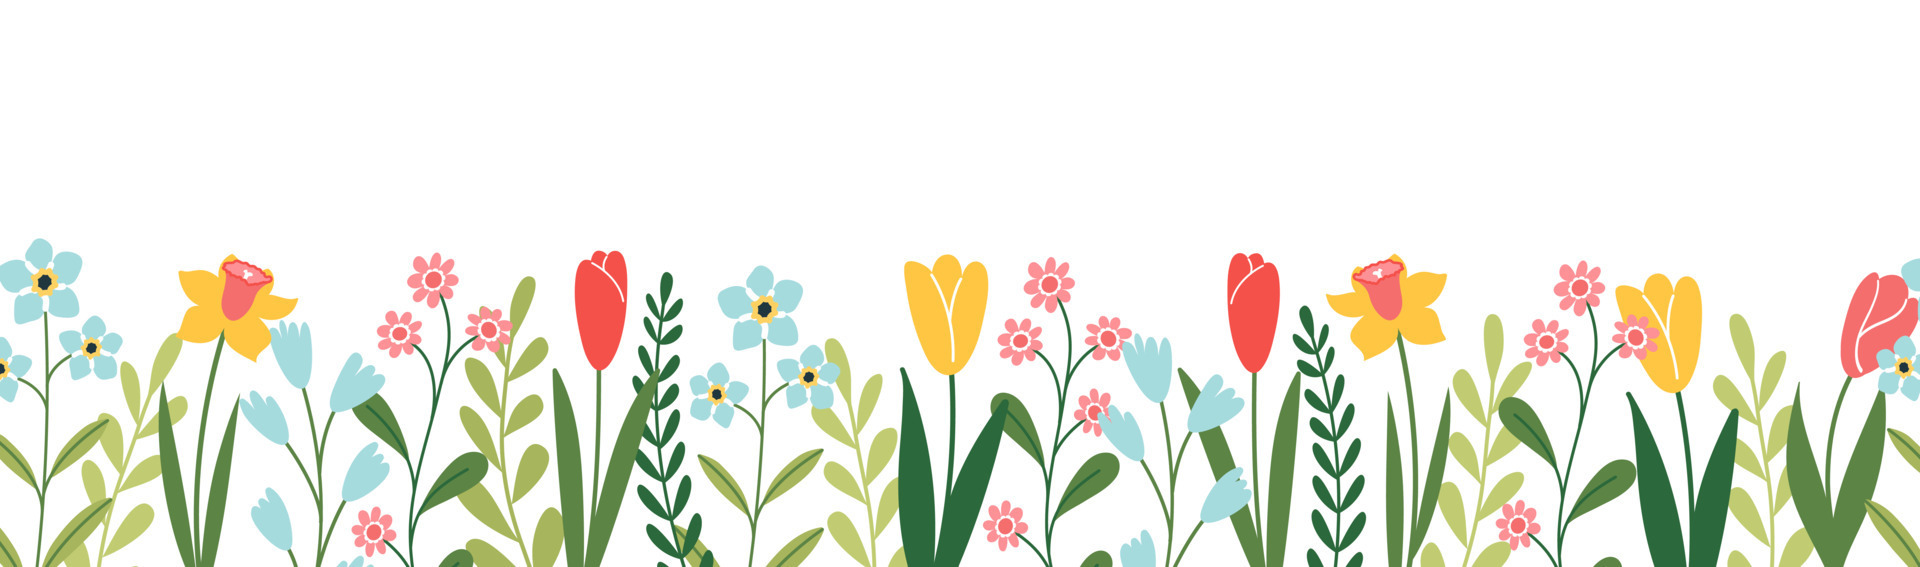 Horizontal banner or floral background decorated colorful flowers ...